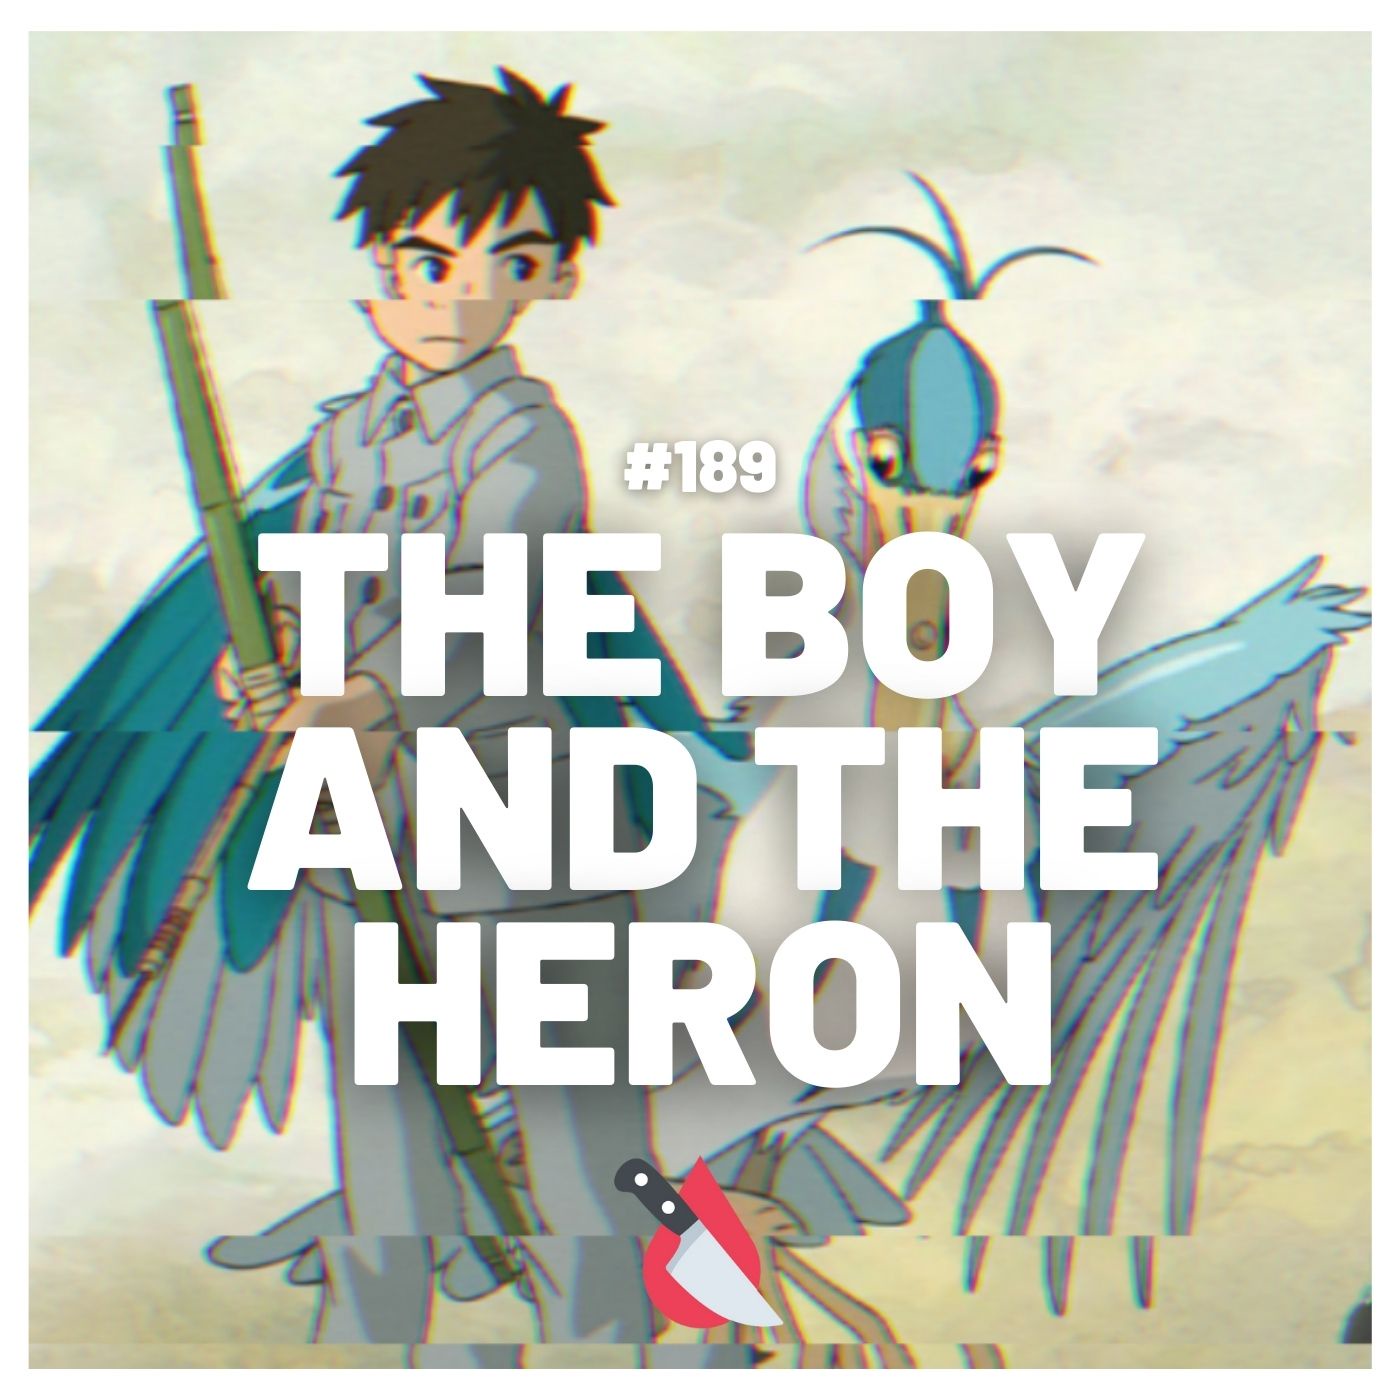 #189 - The Boy and the Heron